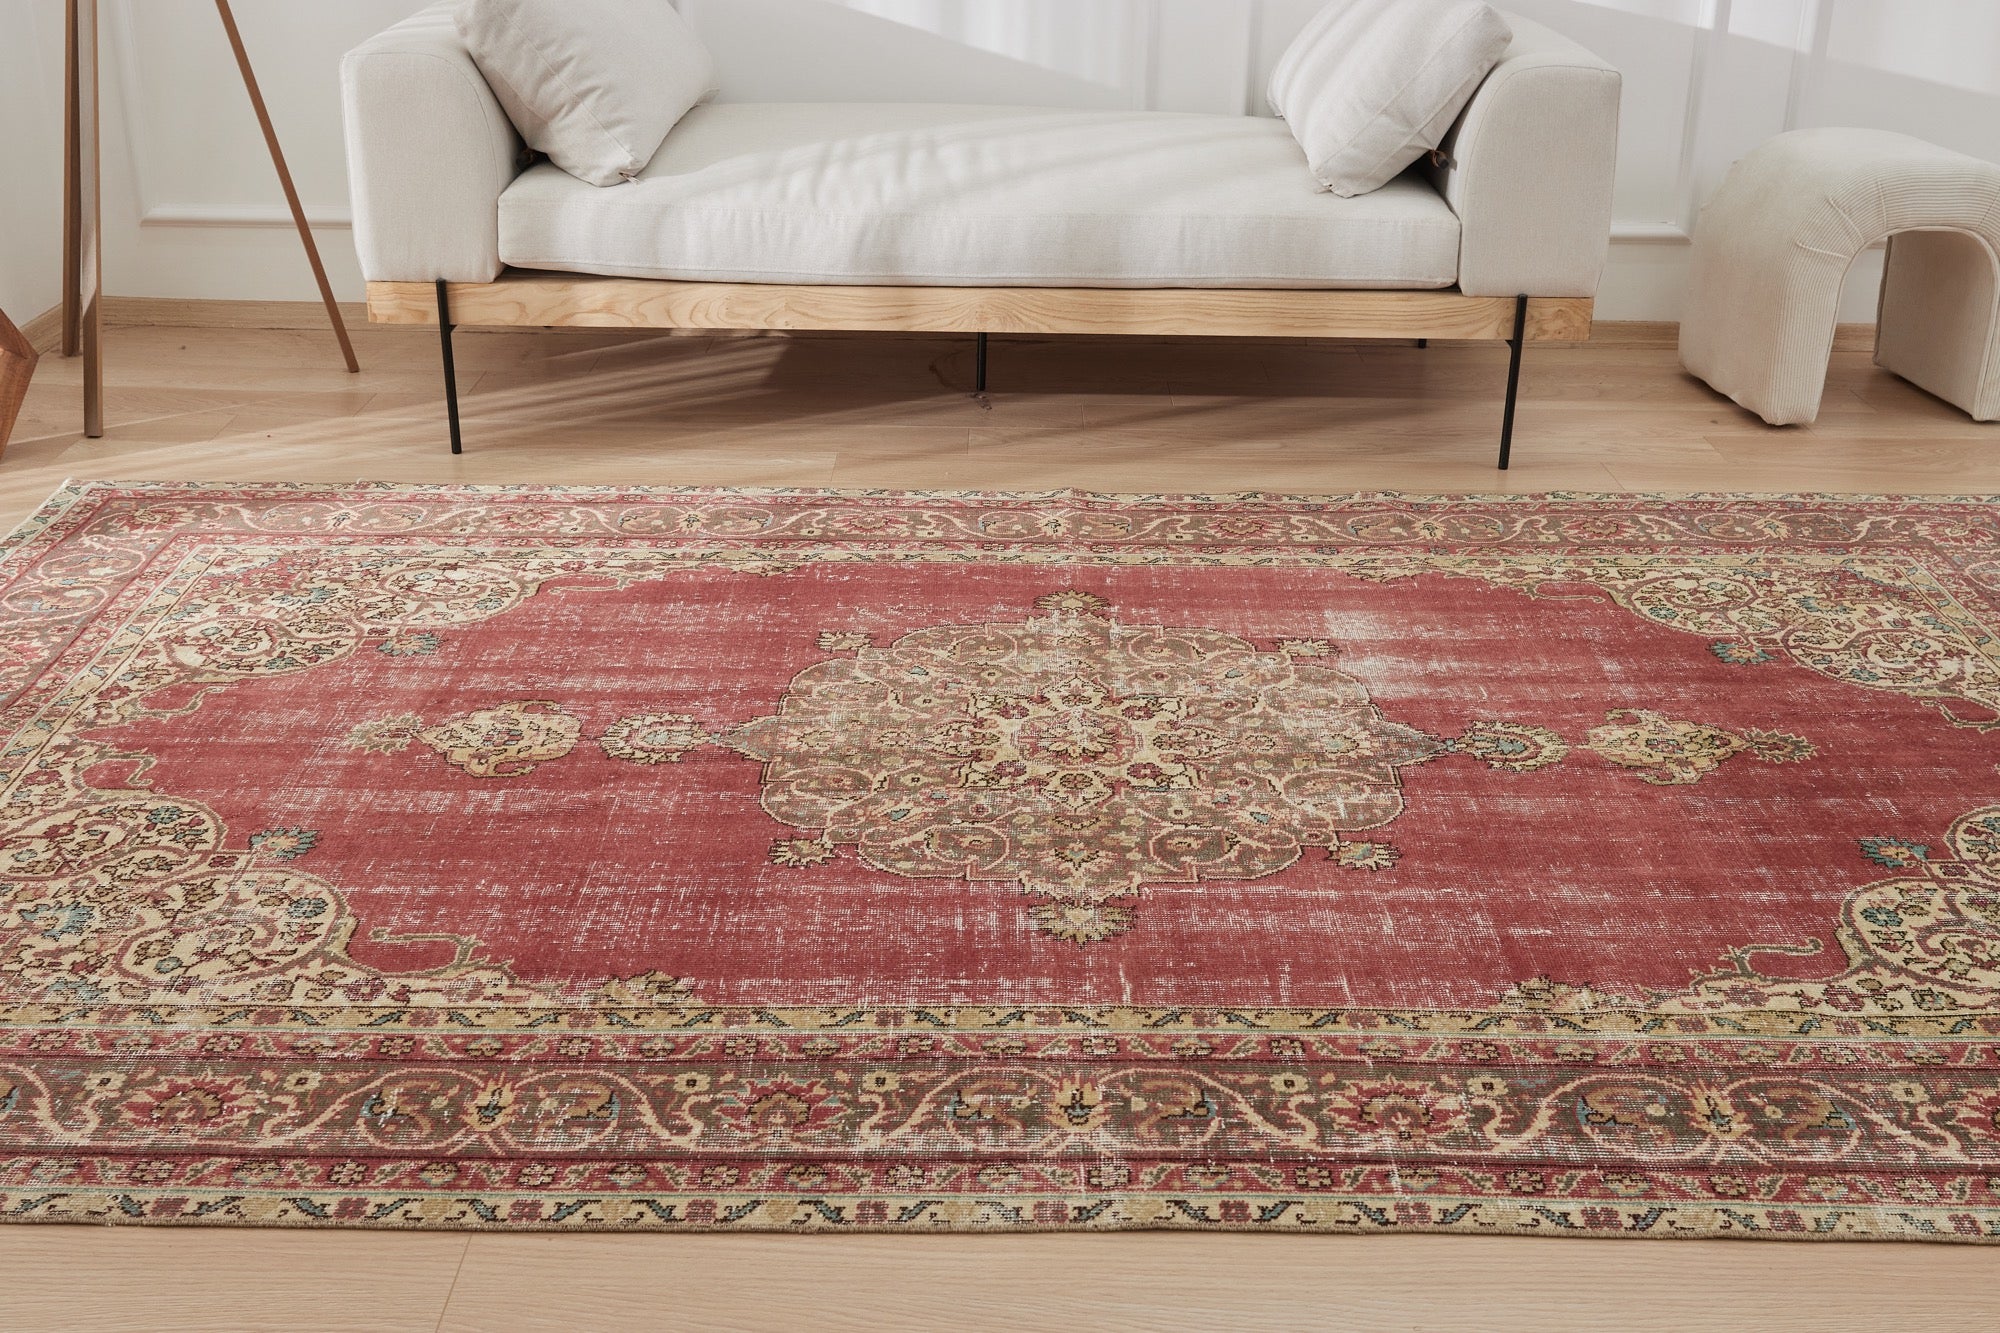 Inesila | 1970's Wool Charm | Antique washed Turkish Artistry | Kuden Rugs